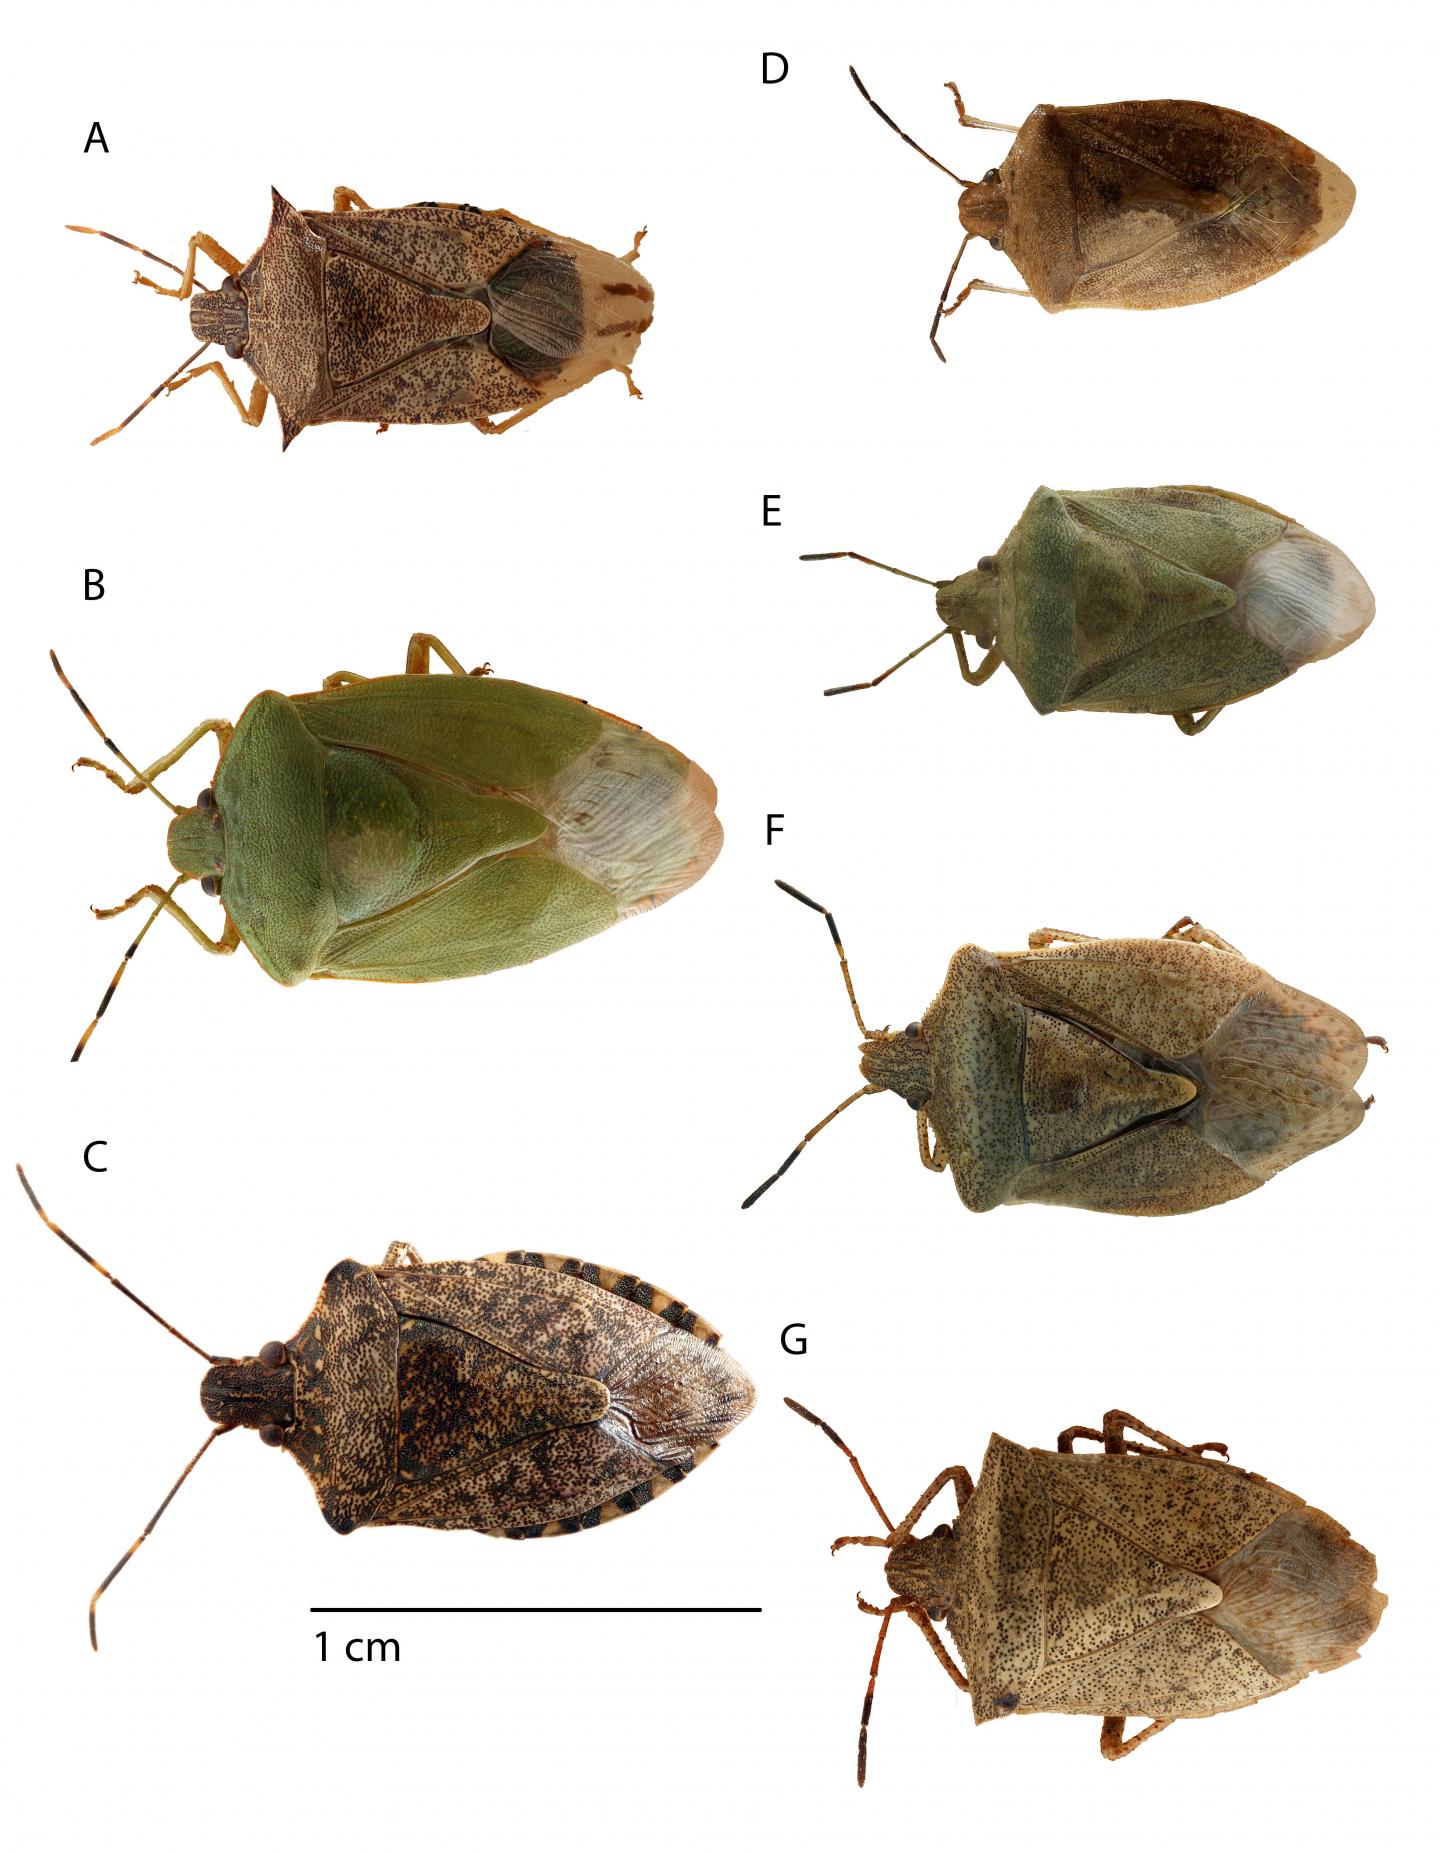 Stink Bugs Profiled in Journal of Integrated Pest Management